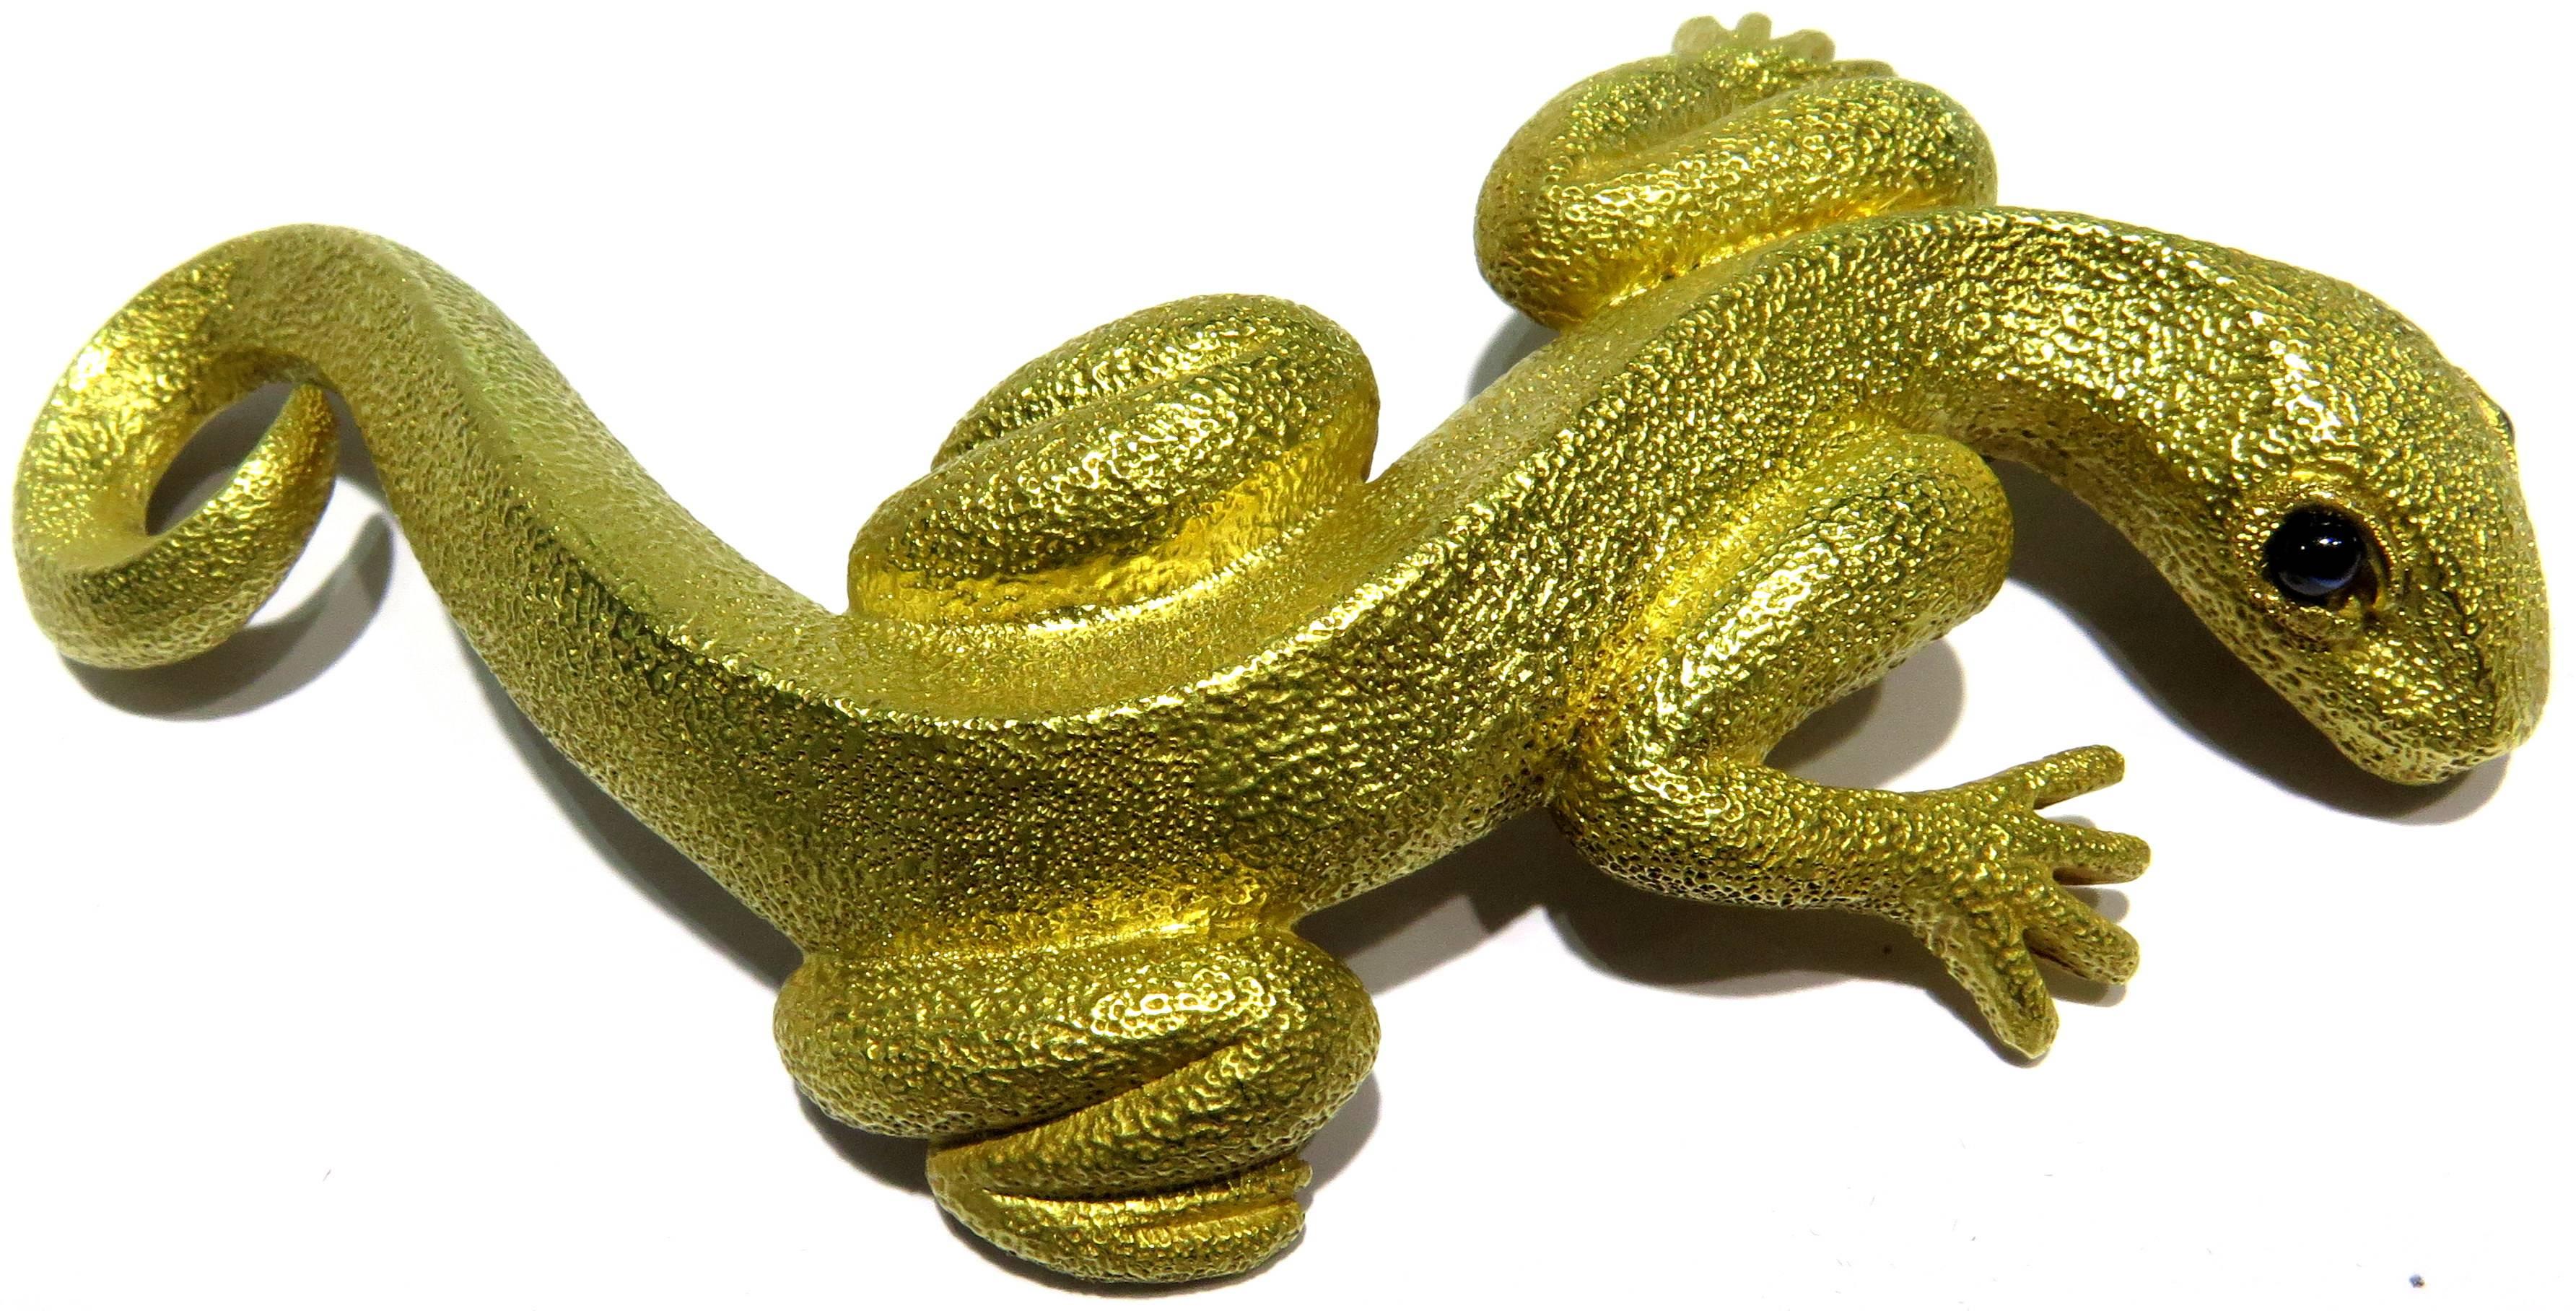 Kieselstein-Cord Enormous Gold Lizard/Salamander Sapphire Pin/Brooch Dated 1990 For Sale 3